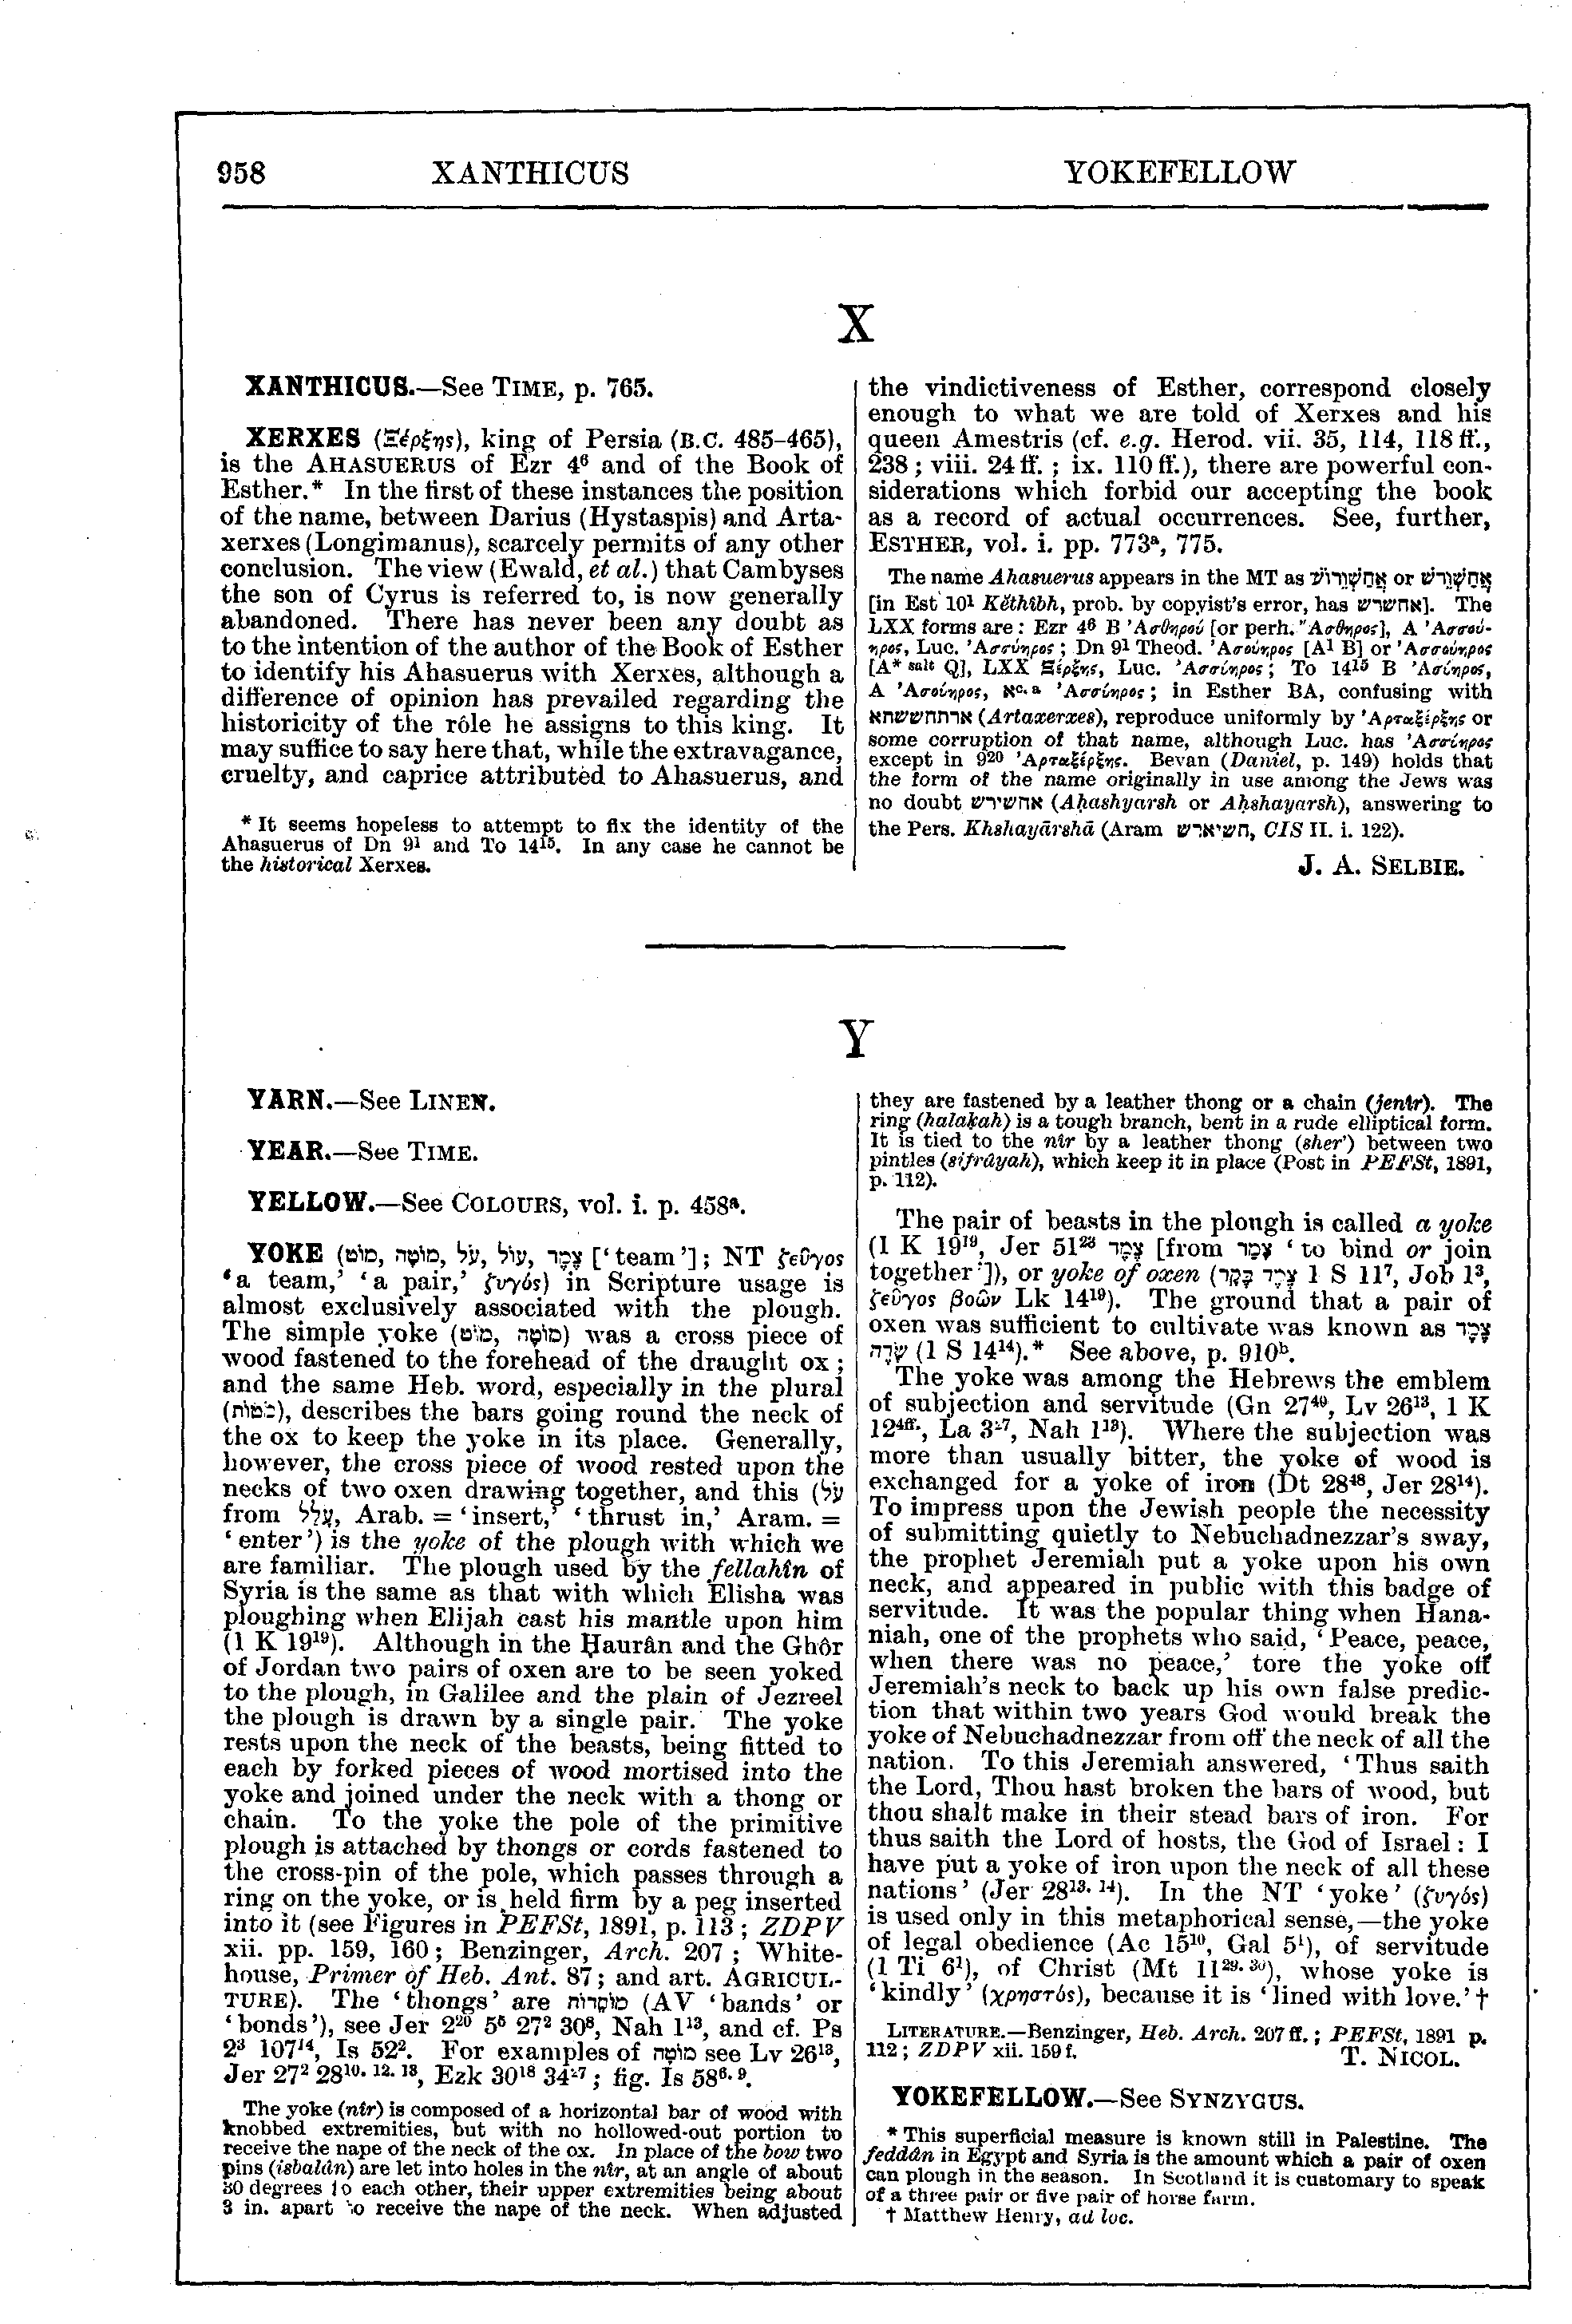 Image of page 958